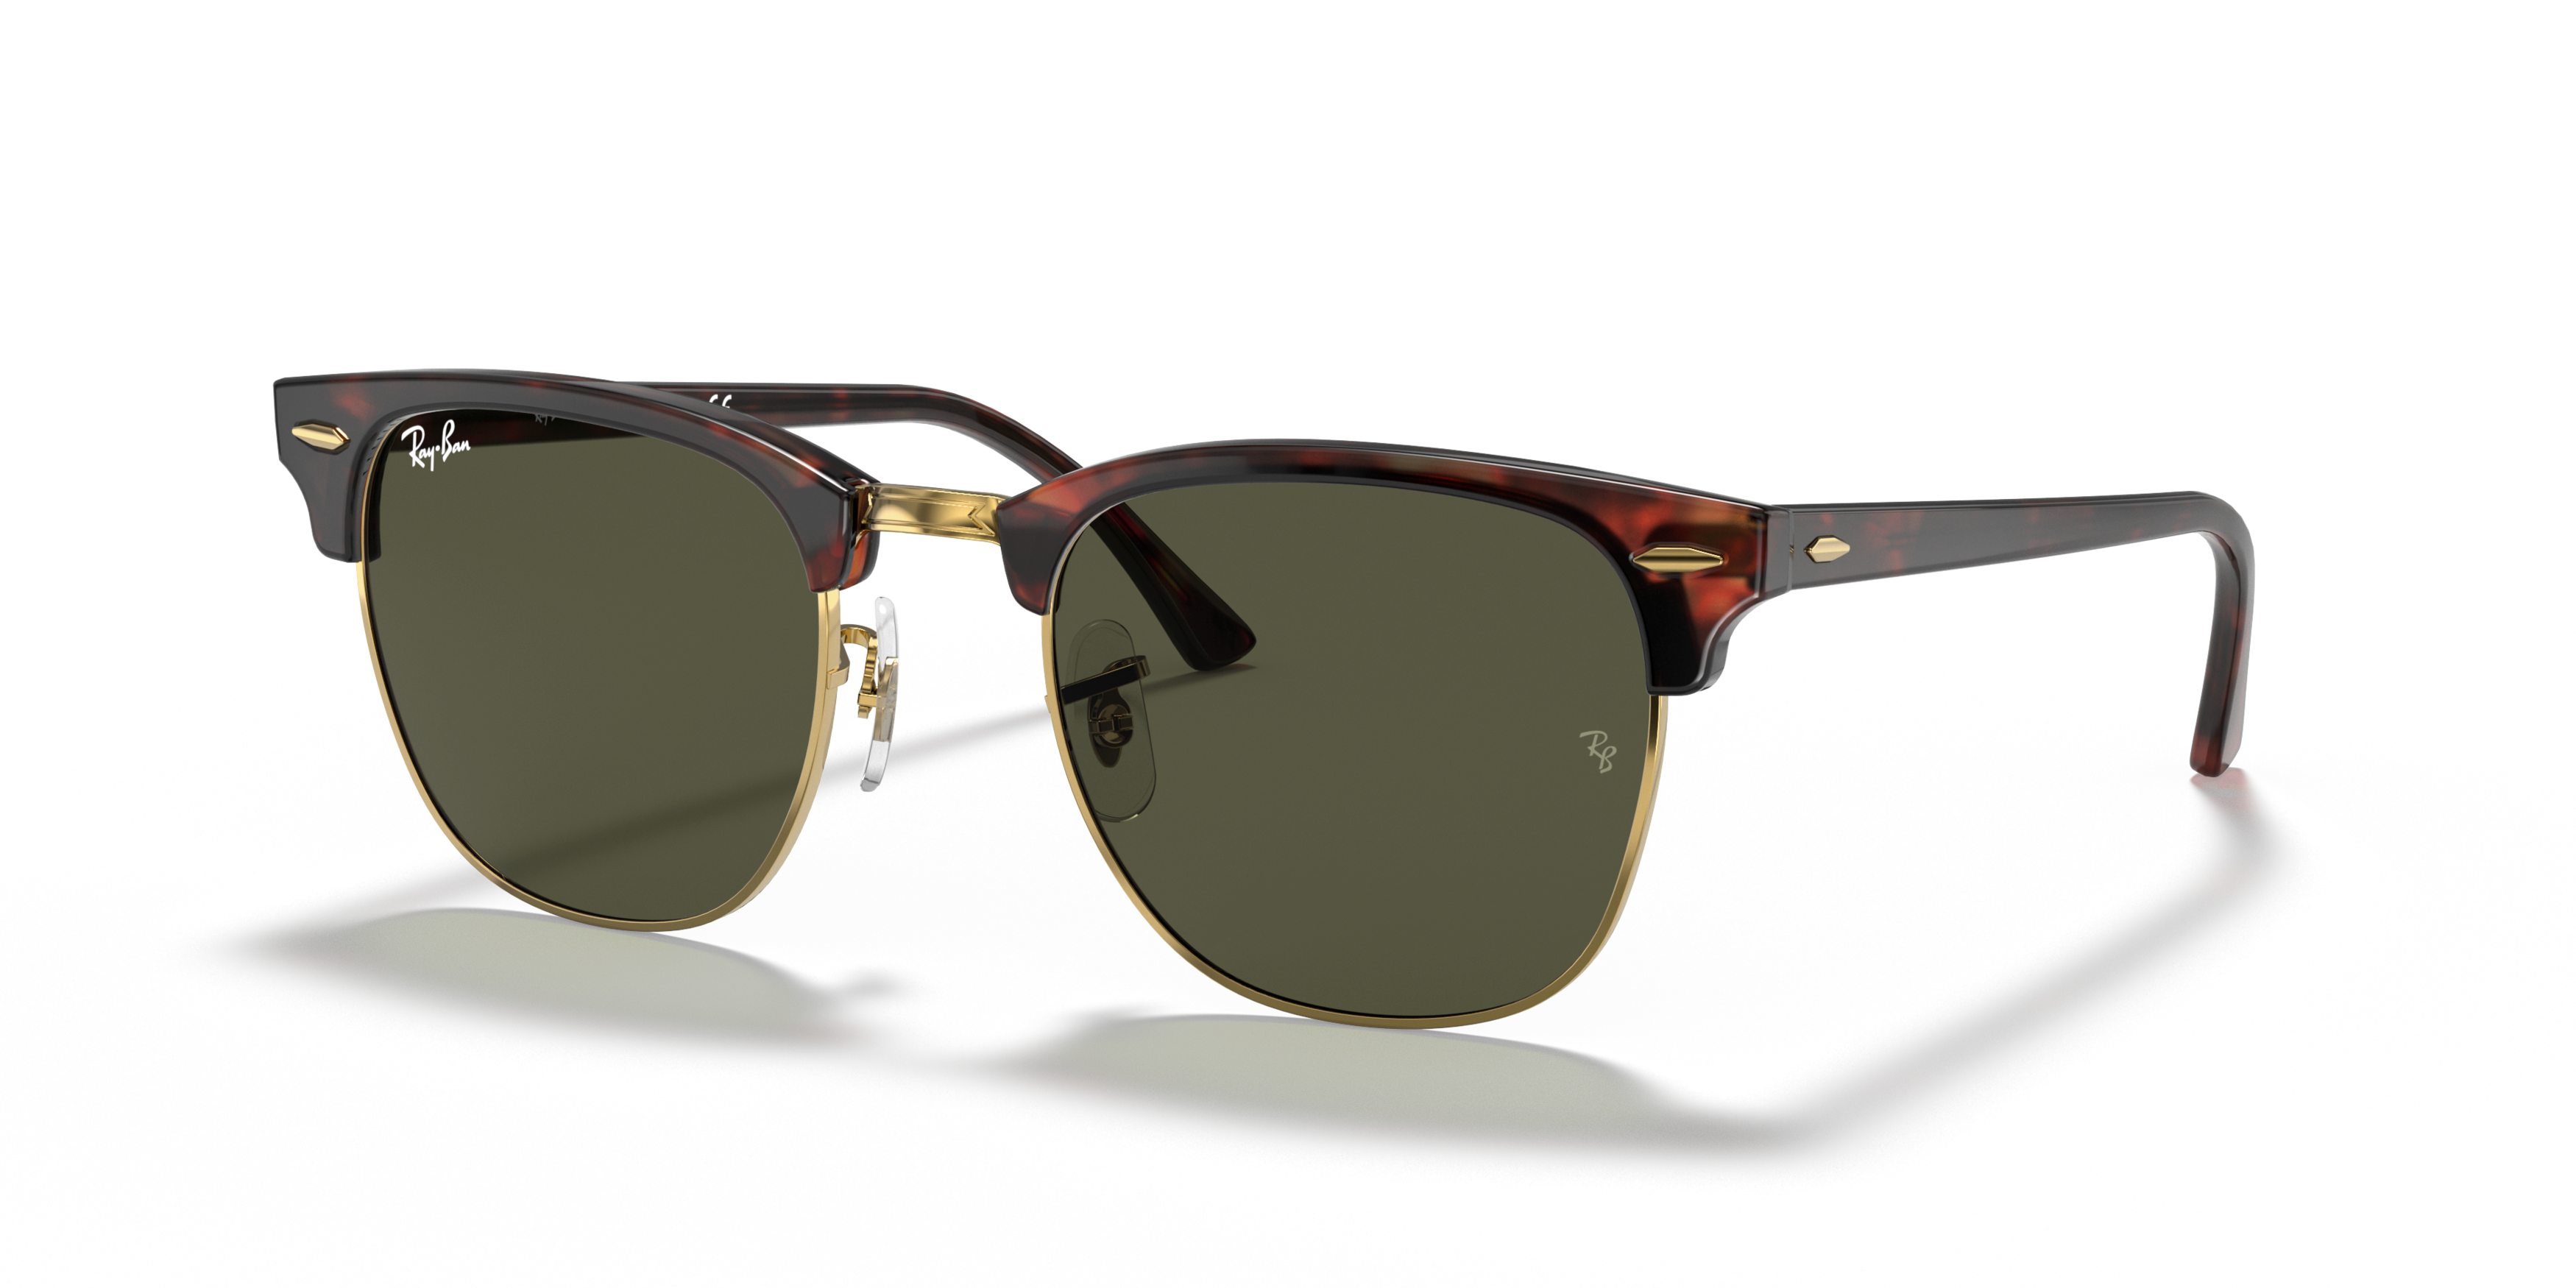 Angle_Left01 Ray-Ban Clubmaster 0RB3016 W0366 Verde / Havana